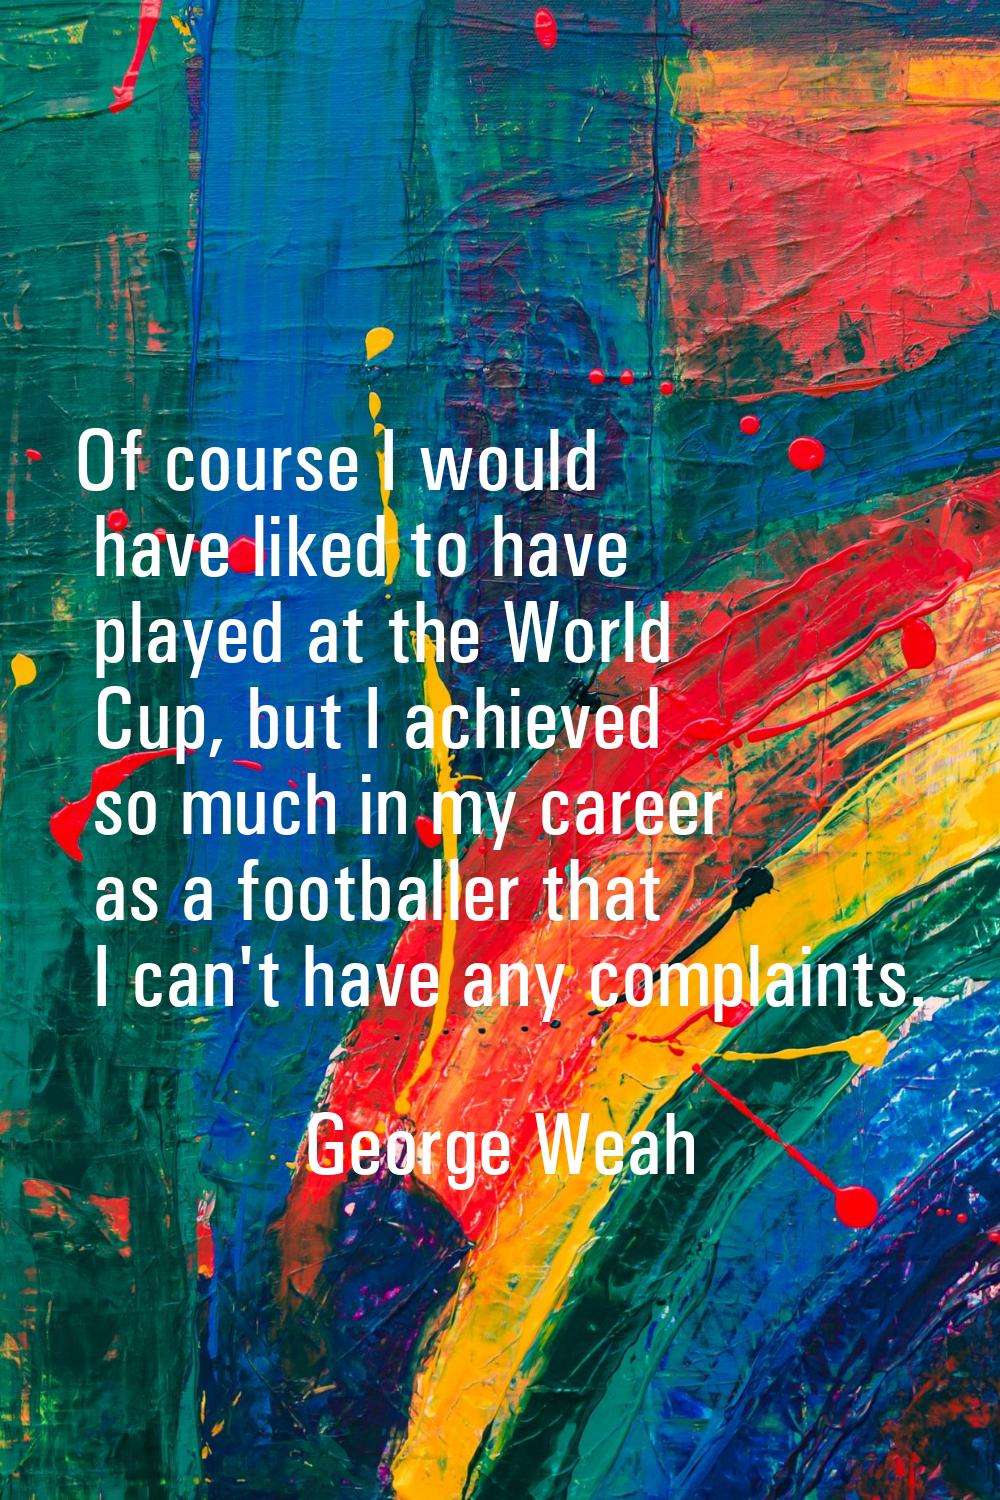 Of course I would have liked to have played at the World Cup, but I achieved so much in my career a